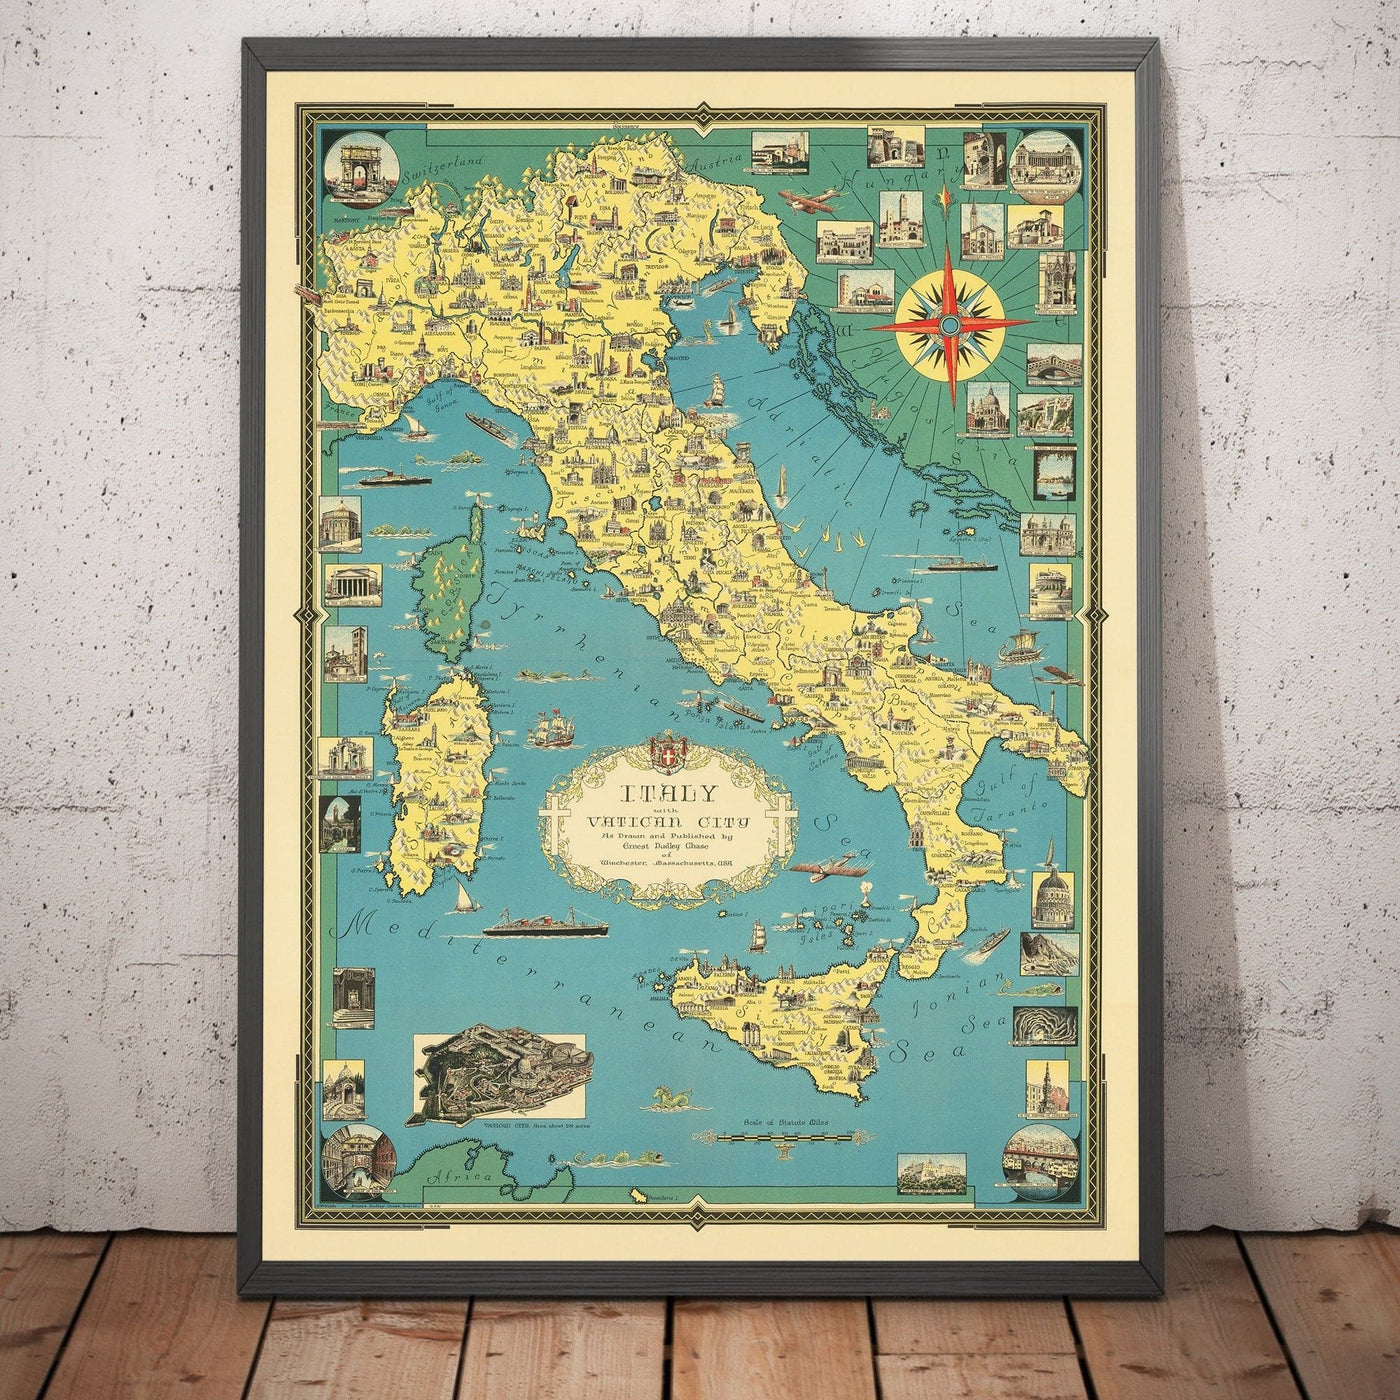 Old Pictorial Map of Italy, 1935 by E. Chase - Illustrated Landmarks, Vatican, Venice, Florence, Rome, Sardinia